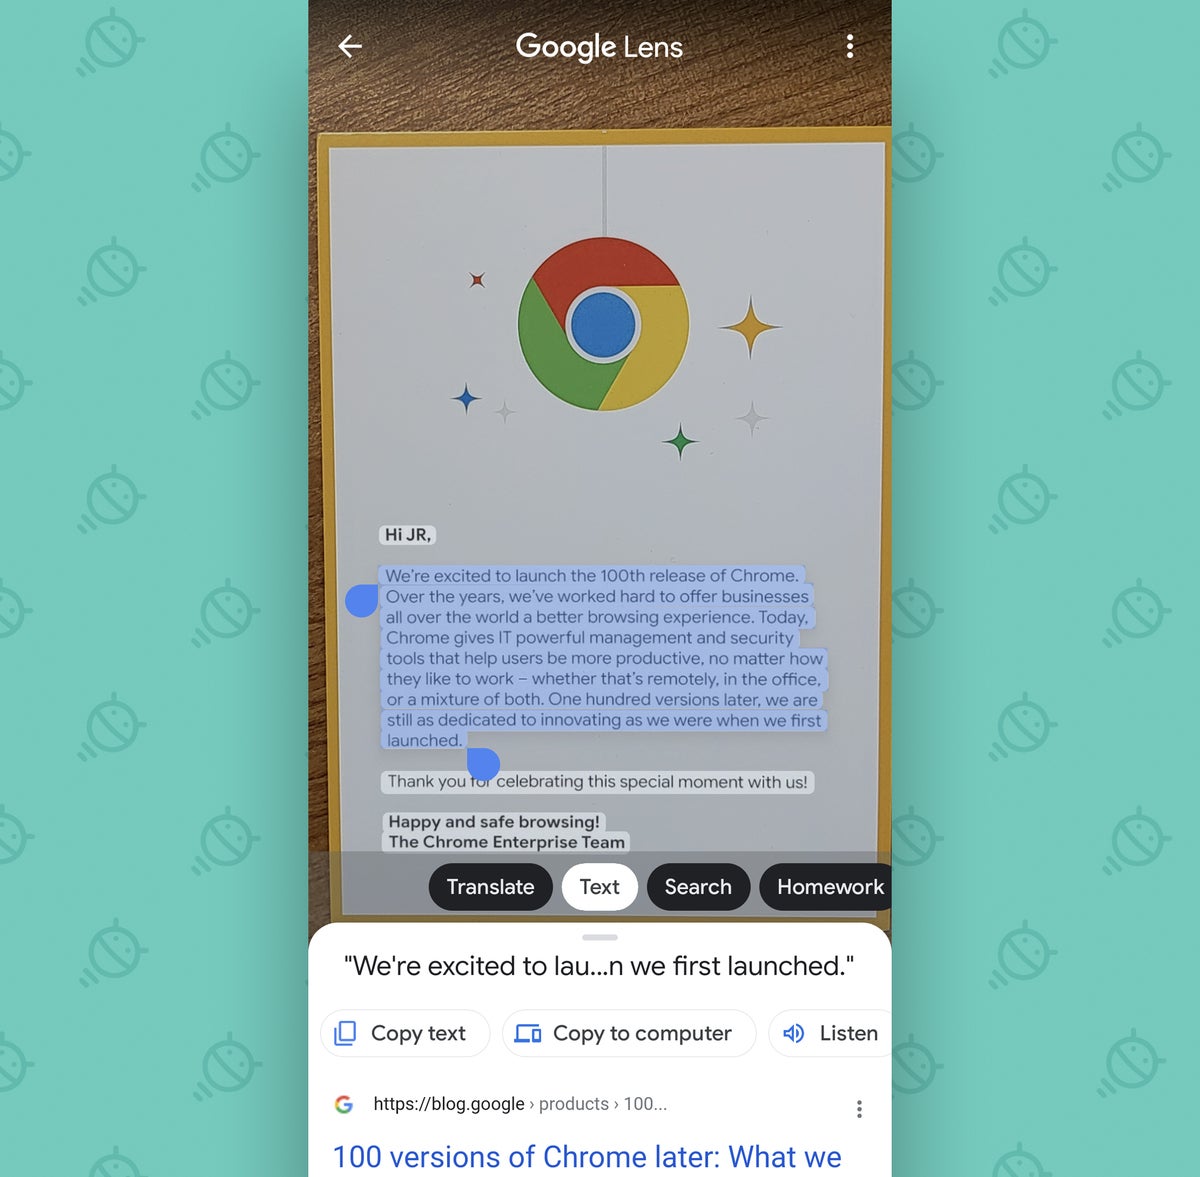 Google apps, Android: Lens